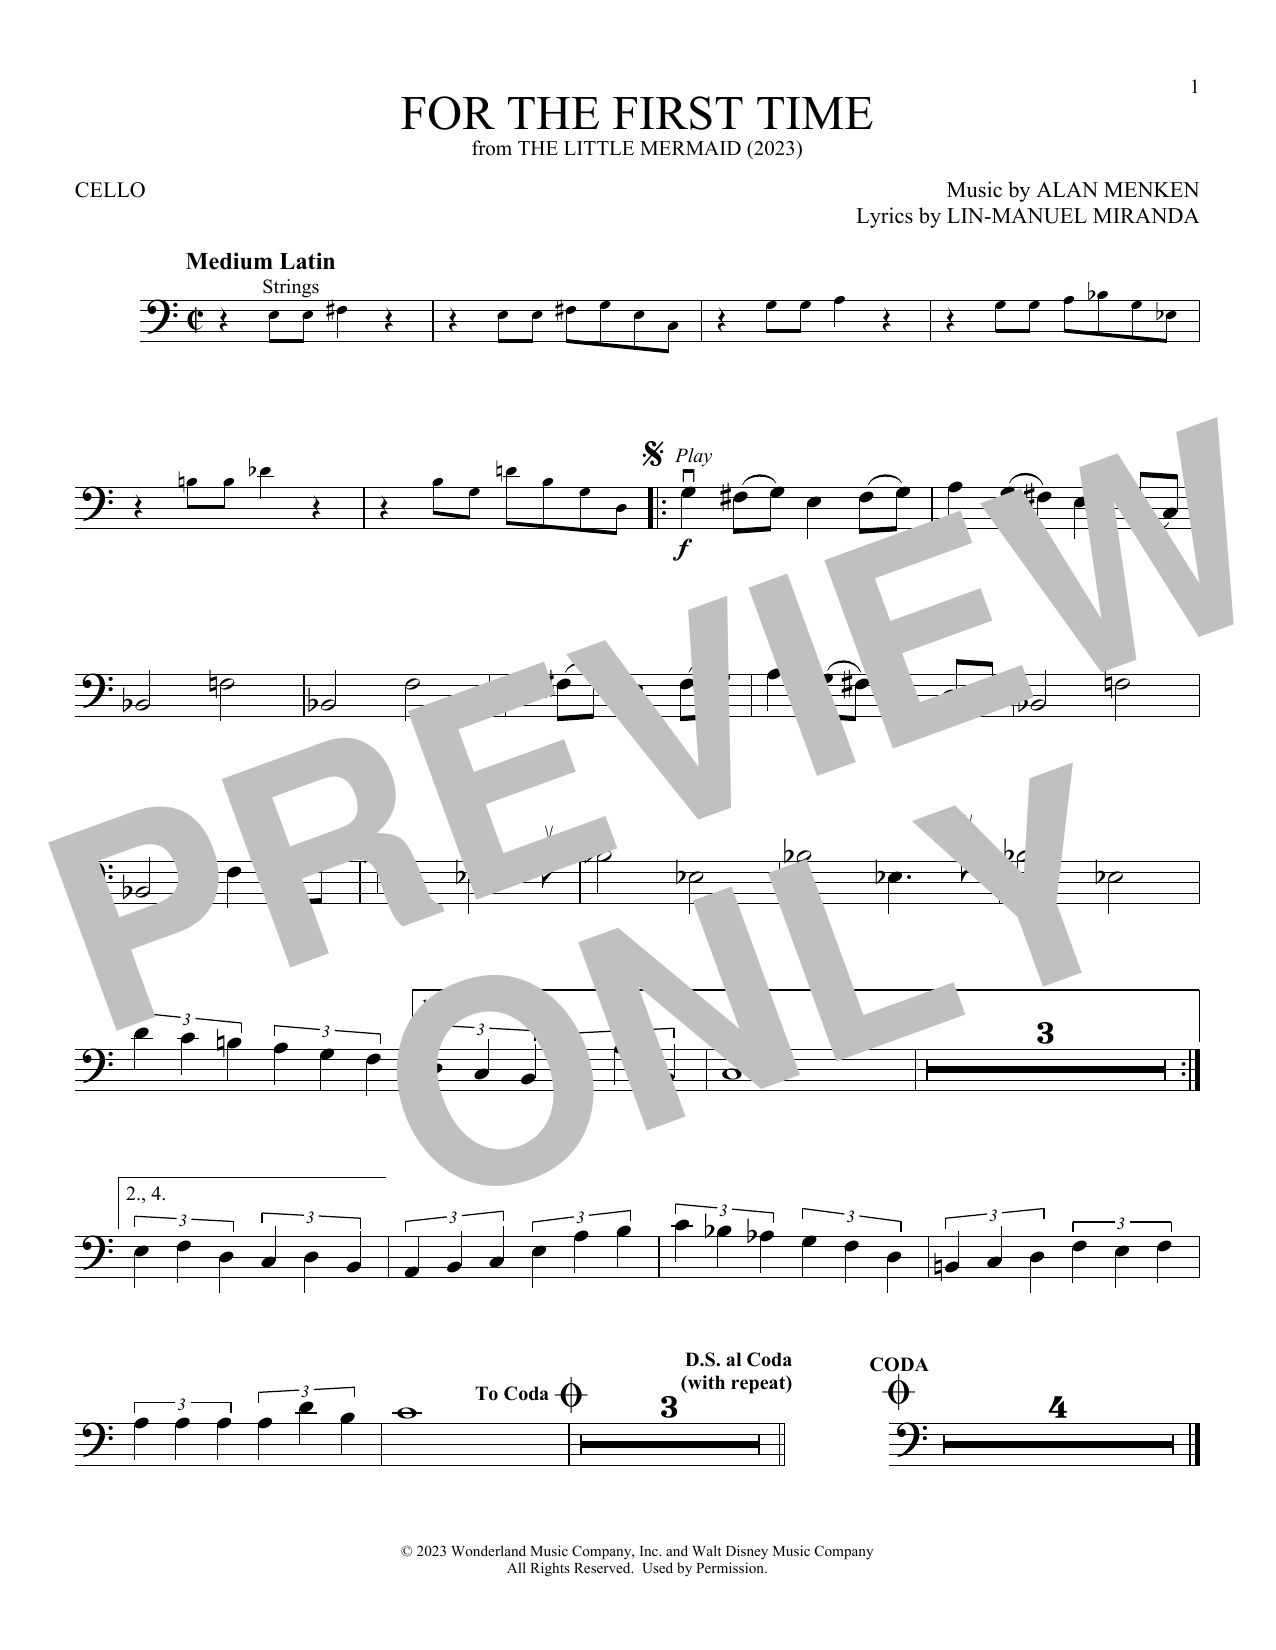 Halle Bailey For The First Time (from The Little Mermaid) (2023) sheet music notes printable PDF score